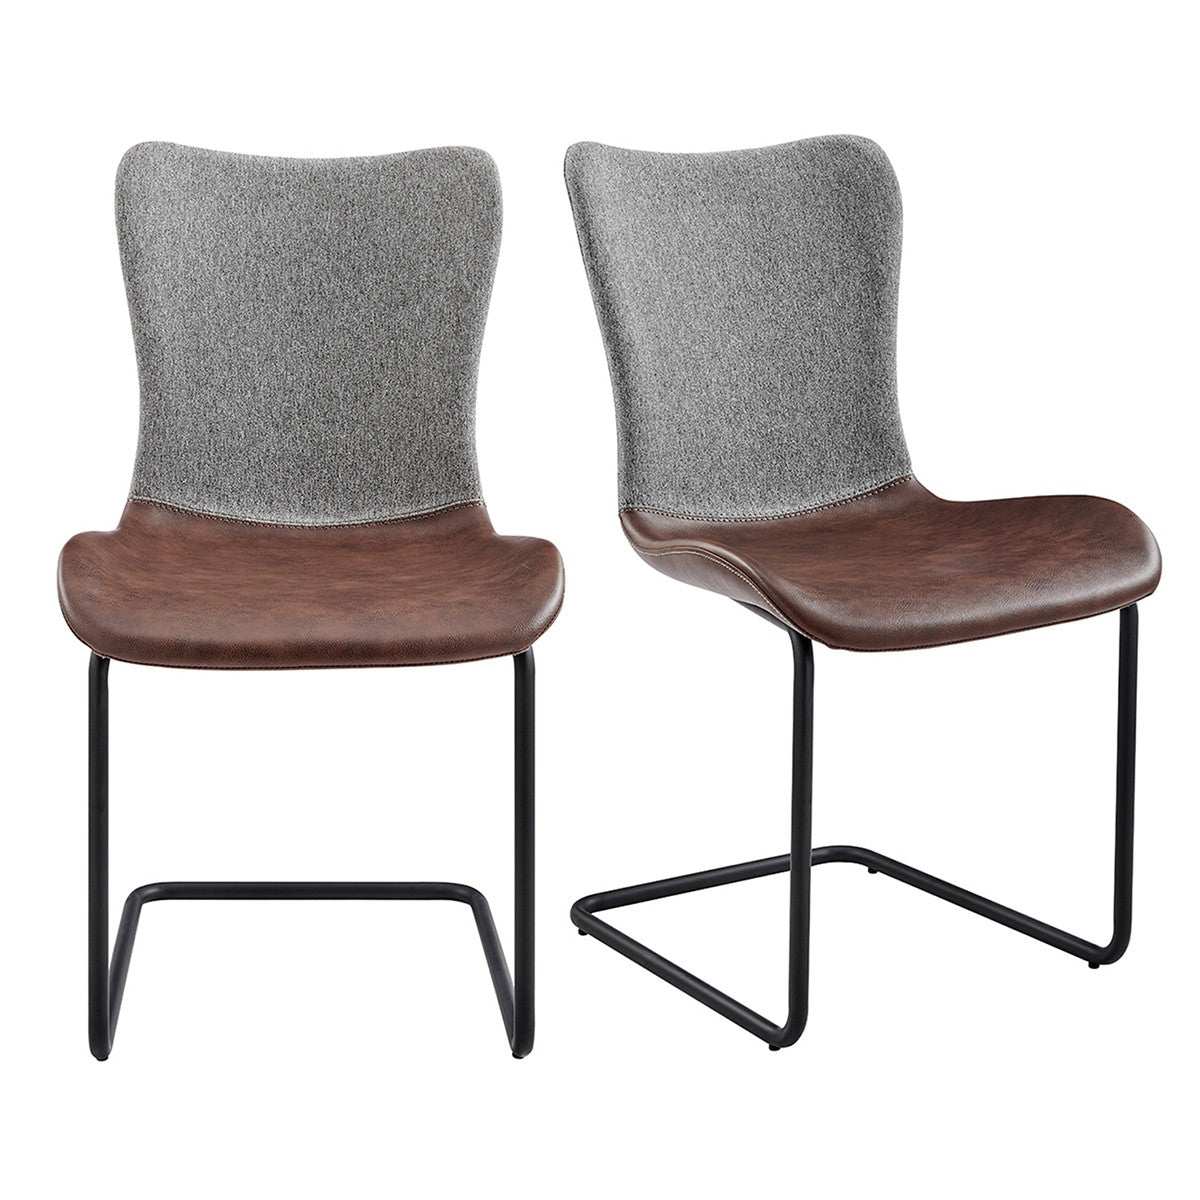 Set of Two Brown Metro Mix Cantilever Dining Chairs